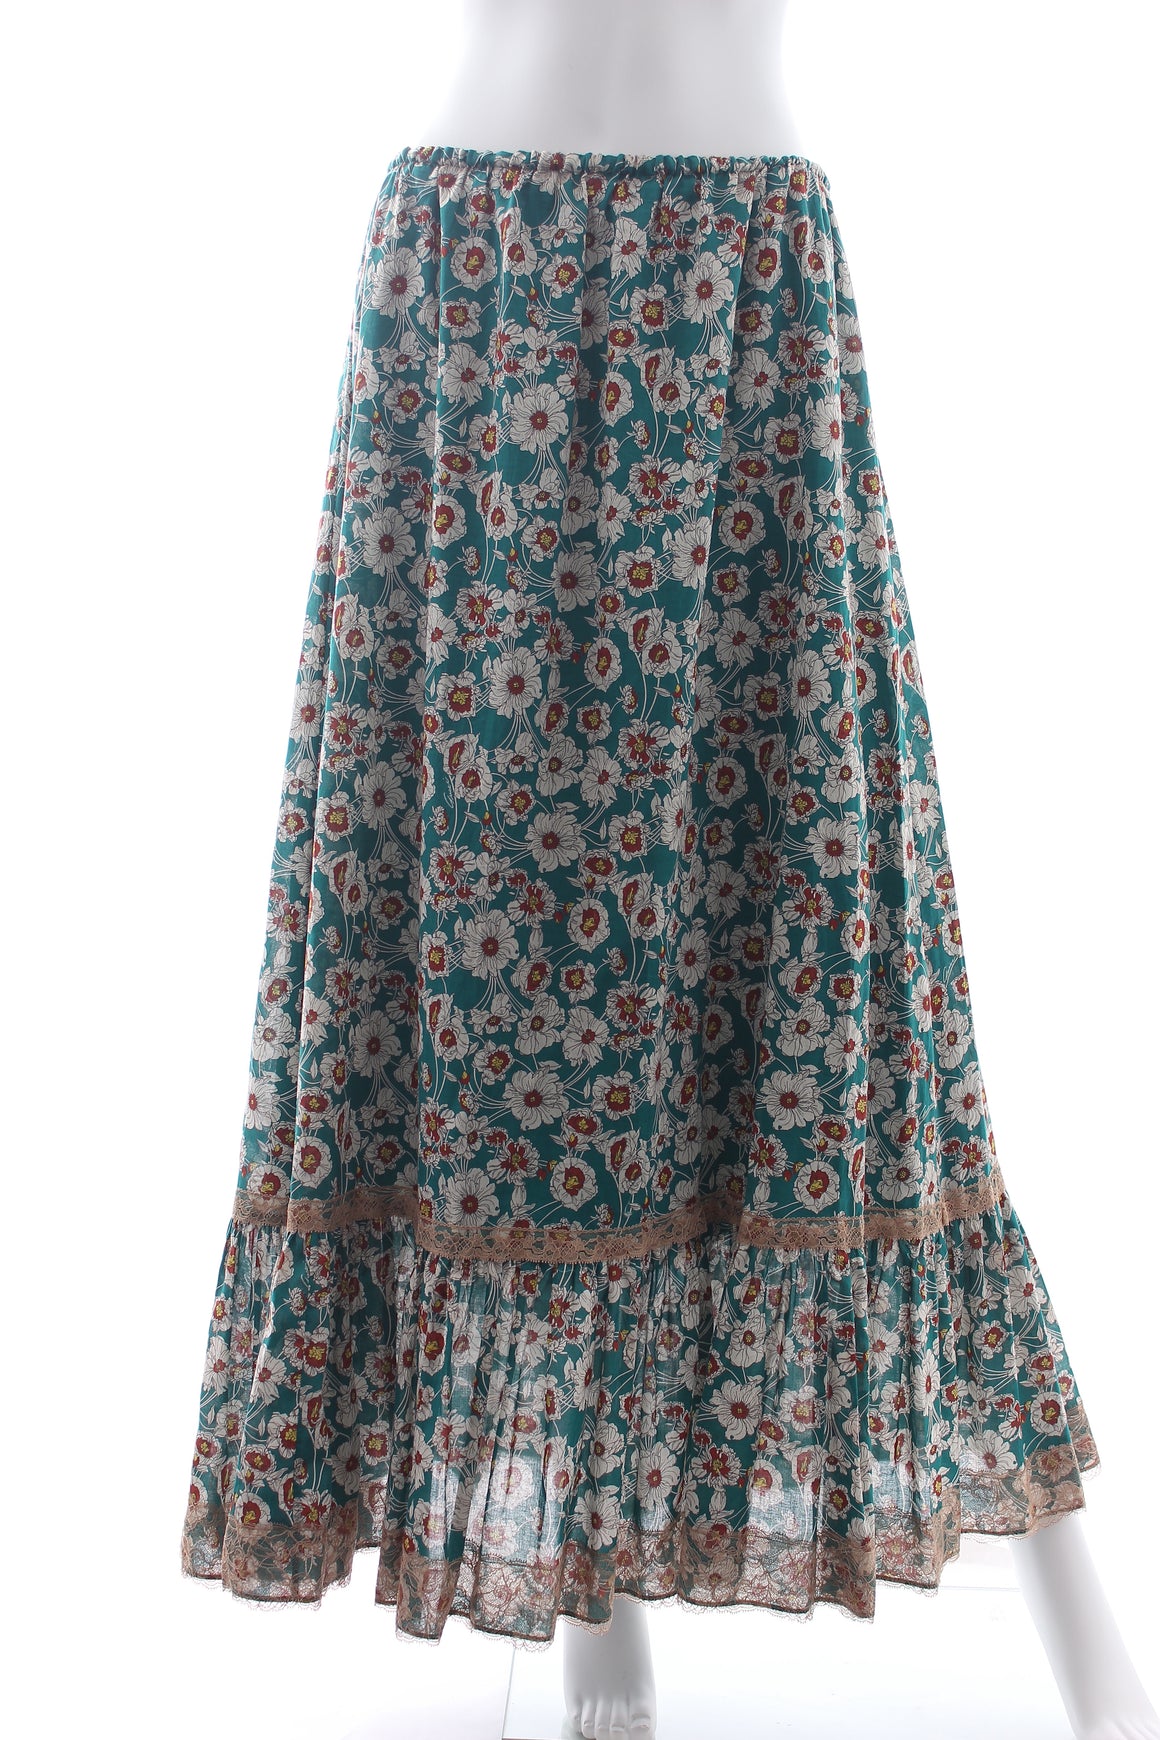 Gucci Lace-Trimmed Floral Printed Midi Skirt